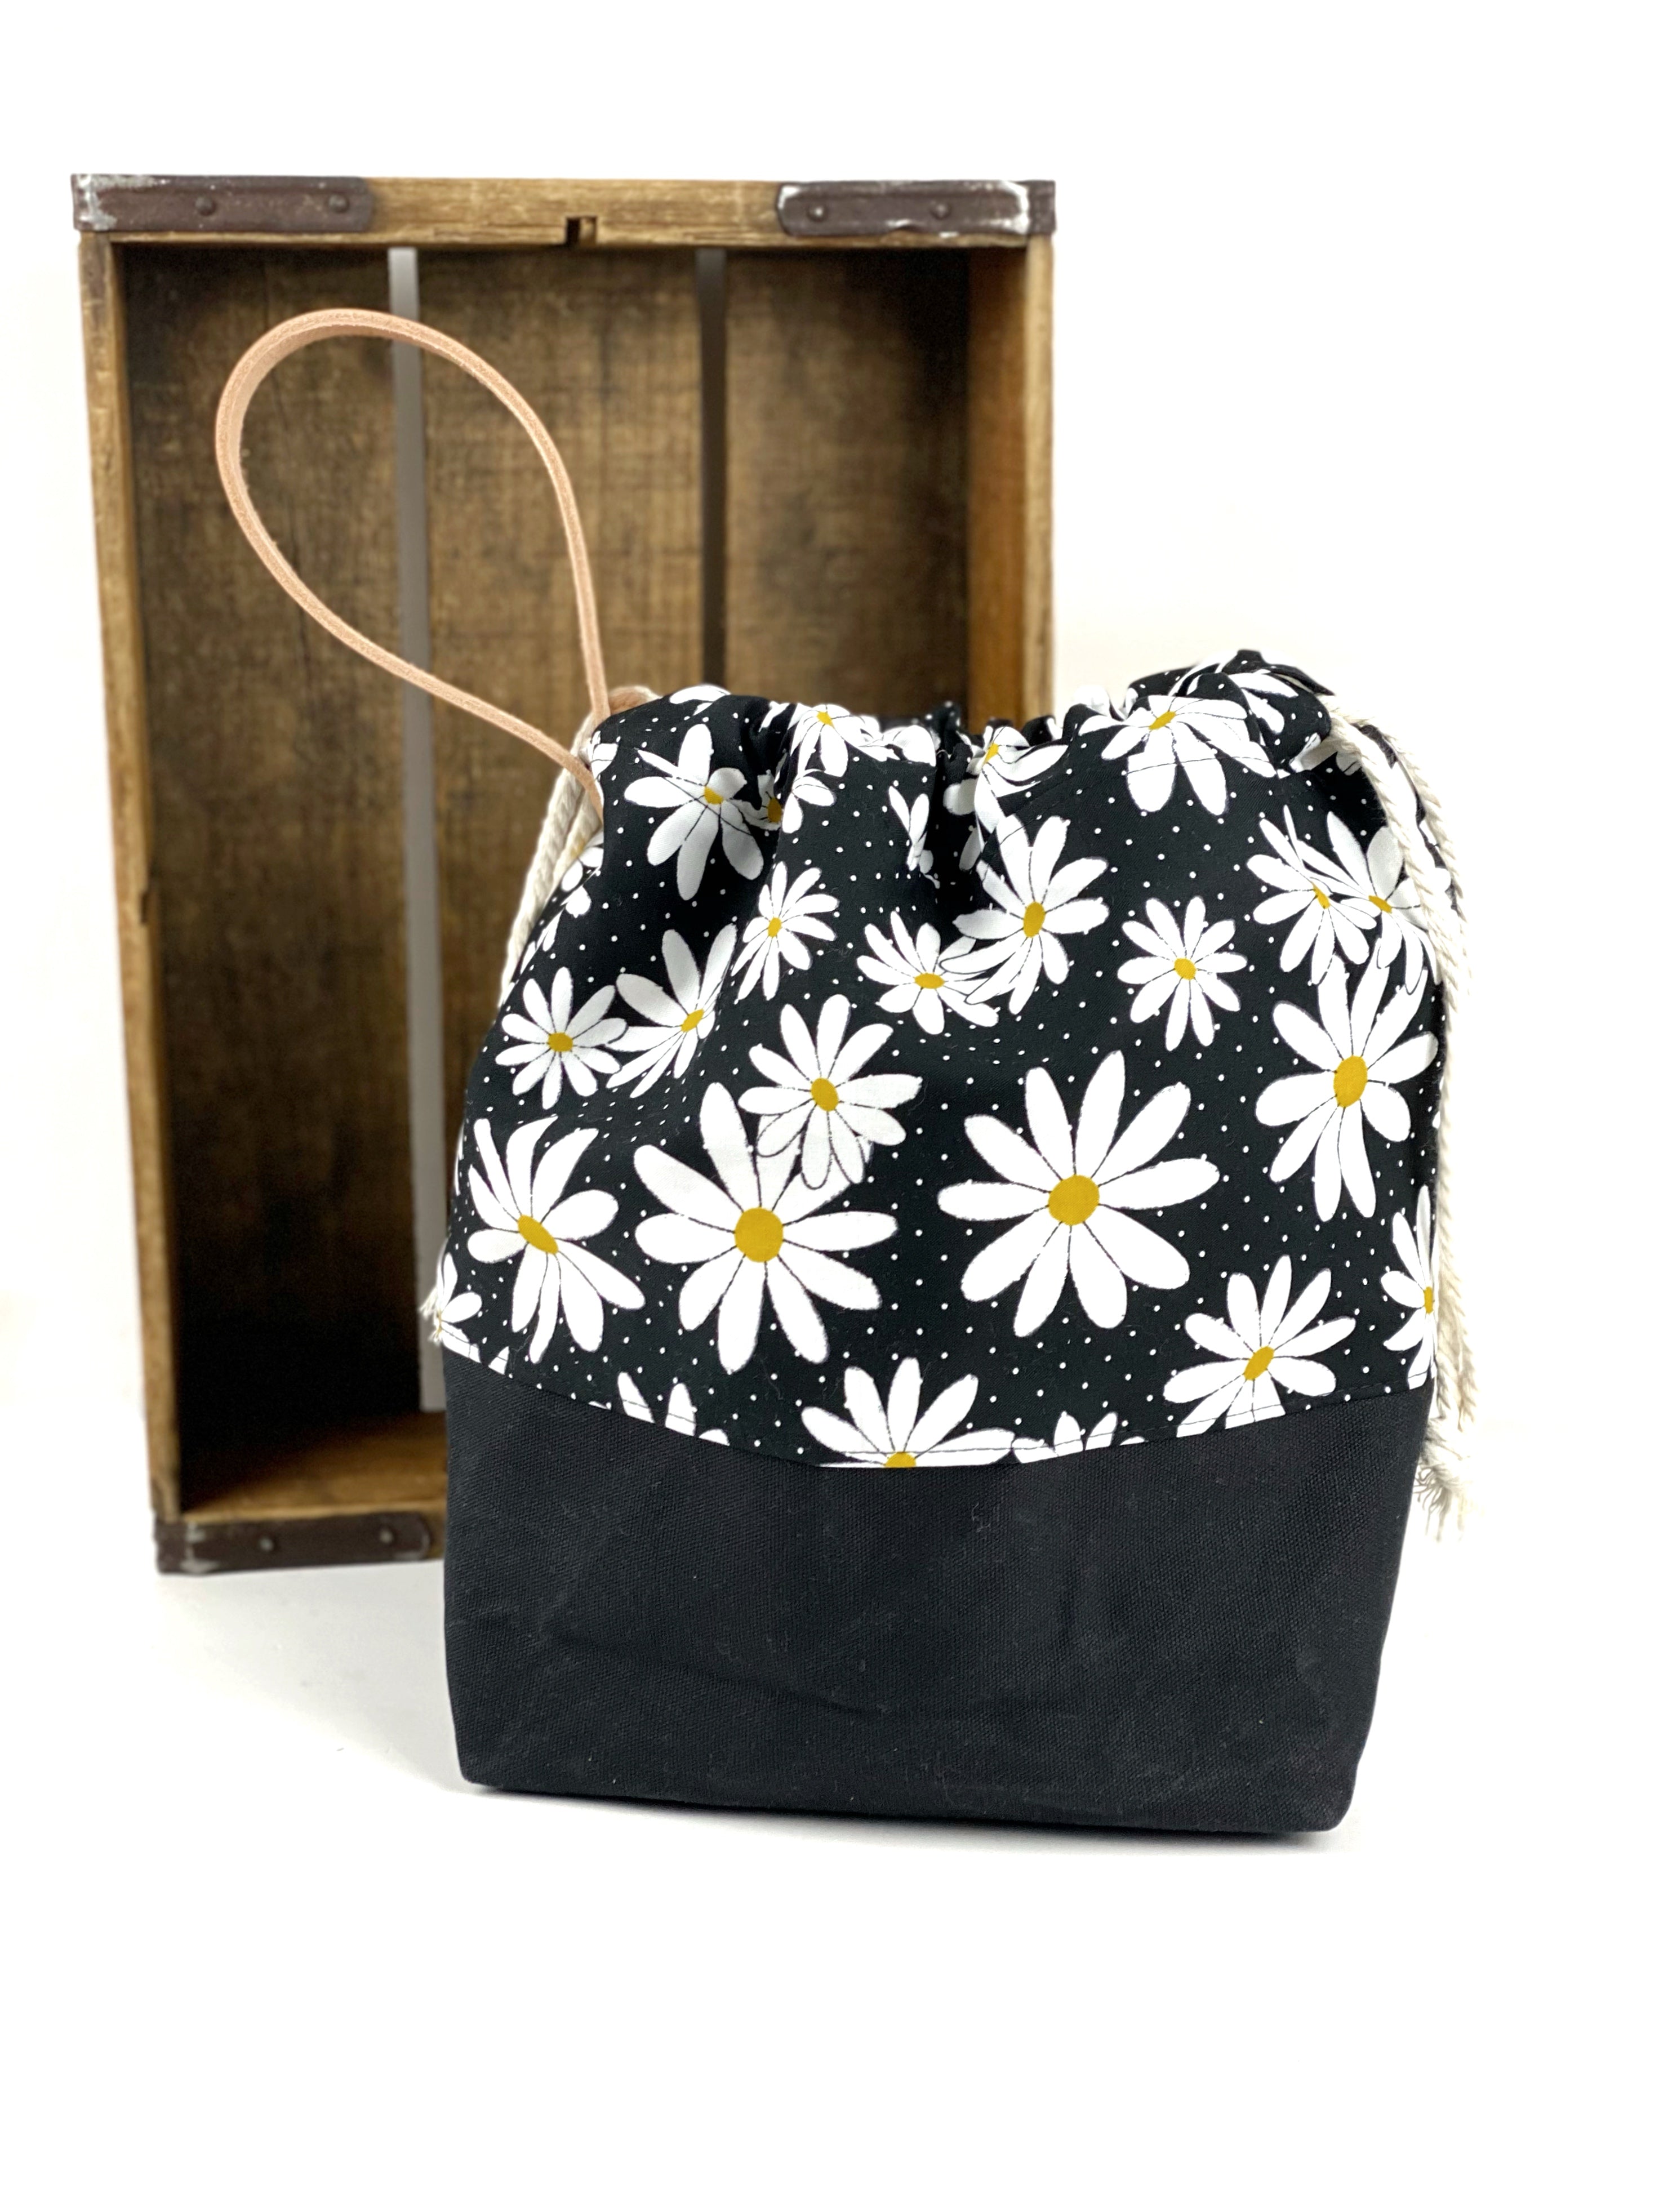 Daisies on Black Project Bag, Project Bag for Knitters, Knitting Bag, Black Floral Bag